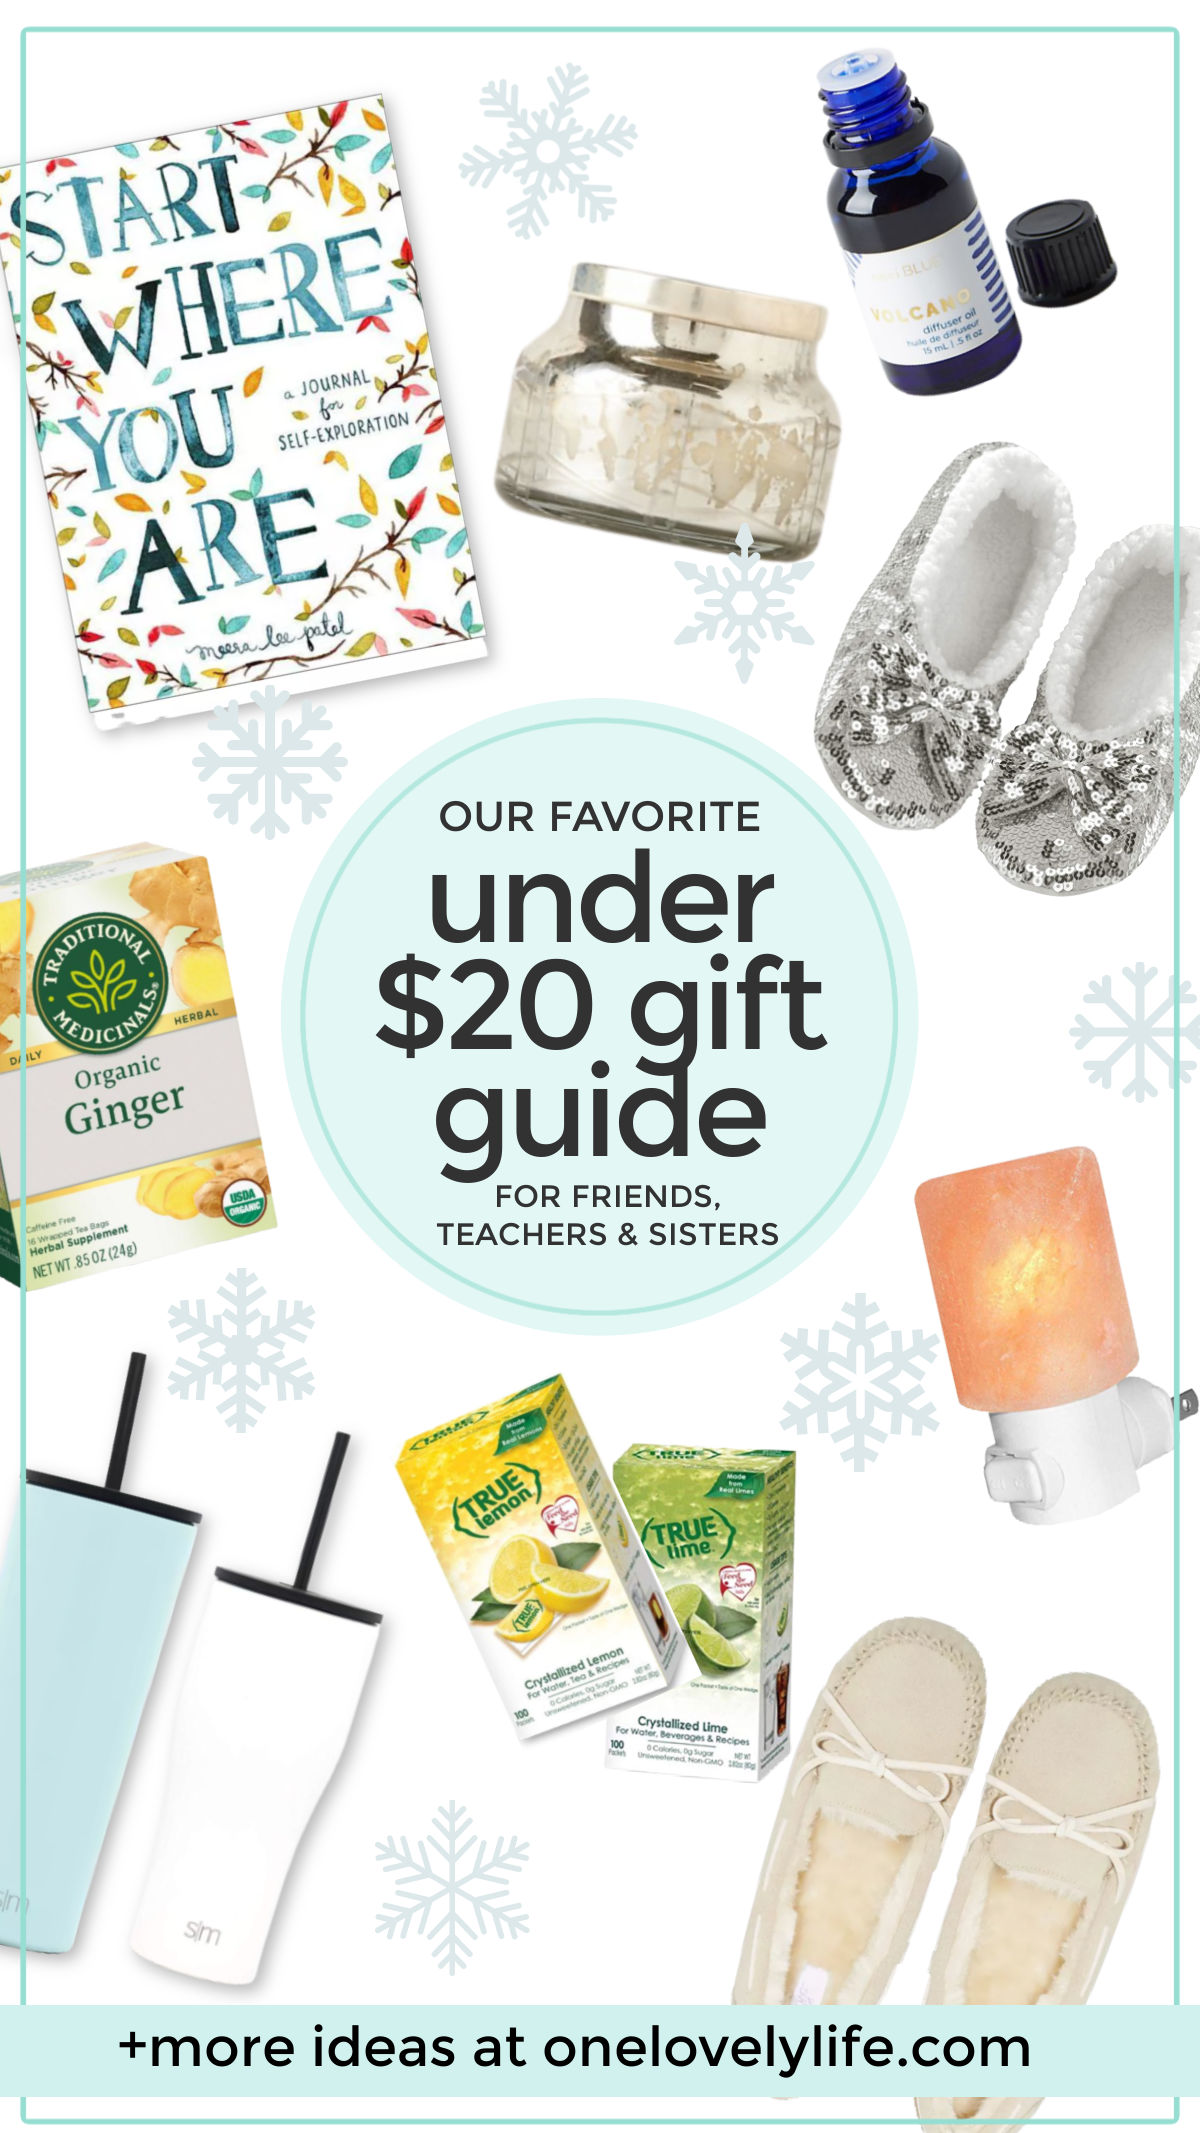 The Under $20 Gift Guide is HERE! - Great gifts can be found on a budget! I've rounded up 40+ AWESOME gifts ideas for $20 or less. They're perfect for friends, sisters, moms, in-laws, teachers, and YOU! // Budget gift ideas // teacher gift ideas // friend gift ideas // sister gift ideas // mother in law gifts // mom gifts // gifts for mom // gifts for in-laws // gifts for teachers // gifts for friends // gifts for sisters #giftguide #giftideas #holidaygifts #budgetgifts